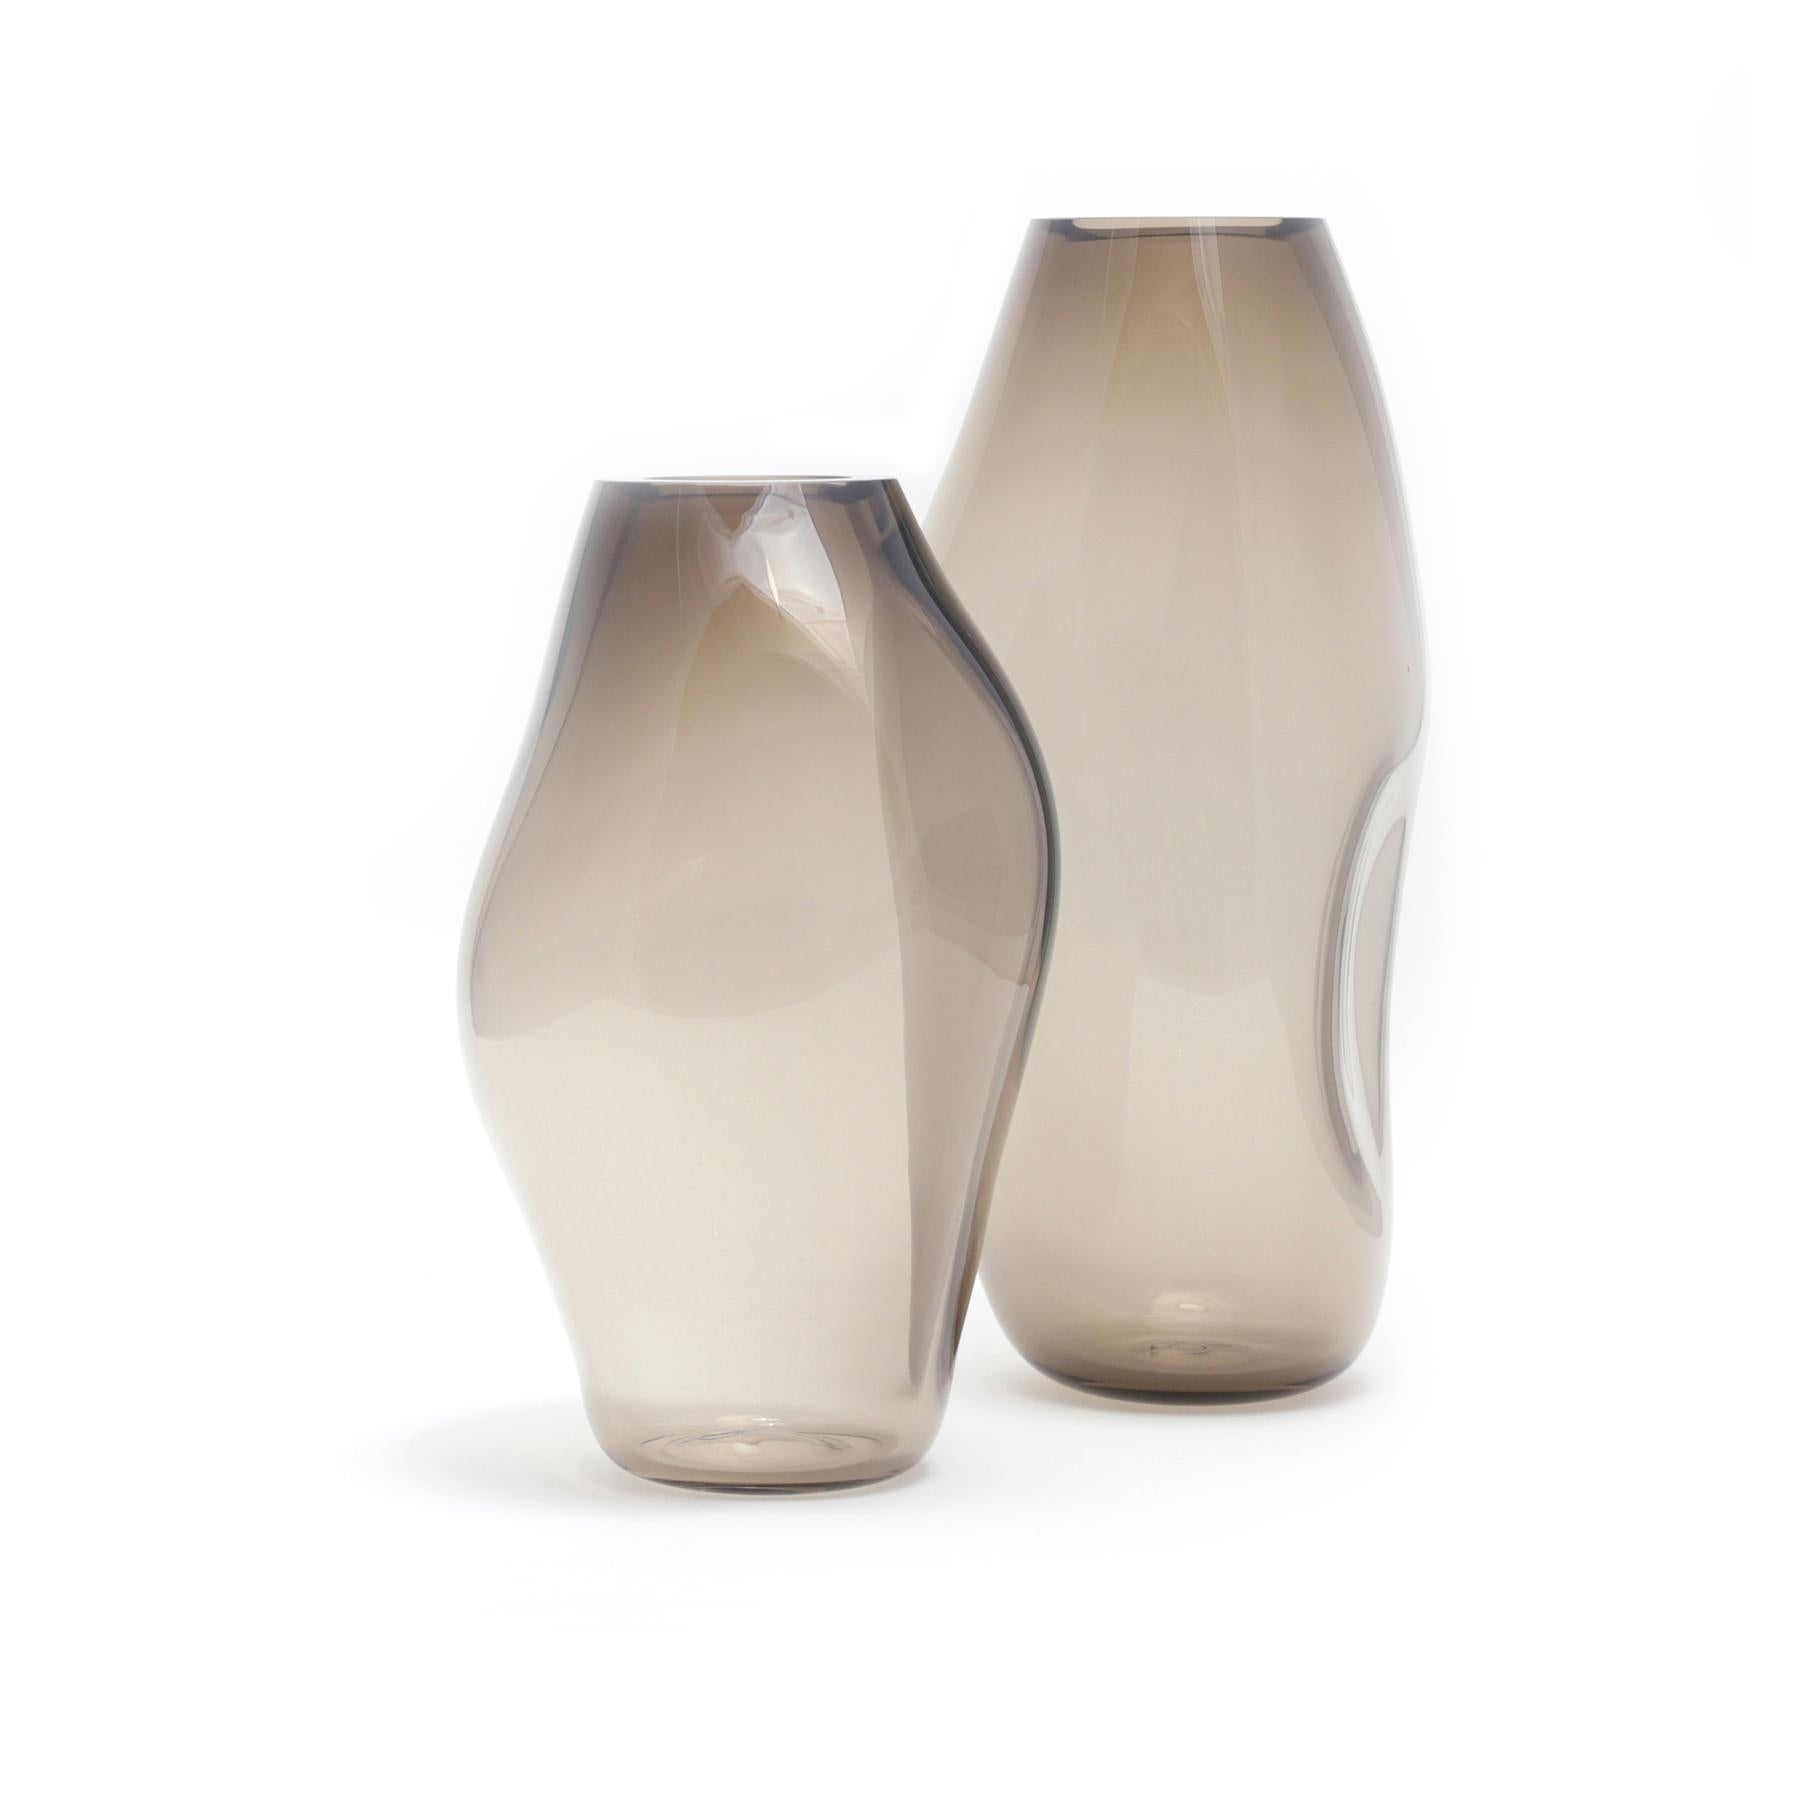 Set of 2 Supernova IV silver smoke M/L vases by Eloa
No UL listed 
Material: glass
Dimensions: D 16 x W 18 x H 49/ D 15 x W 17 x H 36 cm
Also available in different colours and dimensions.

Supernova is a collection of vases and bowls that, though